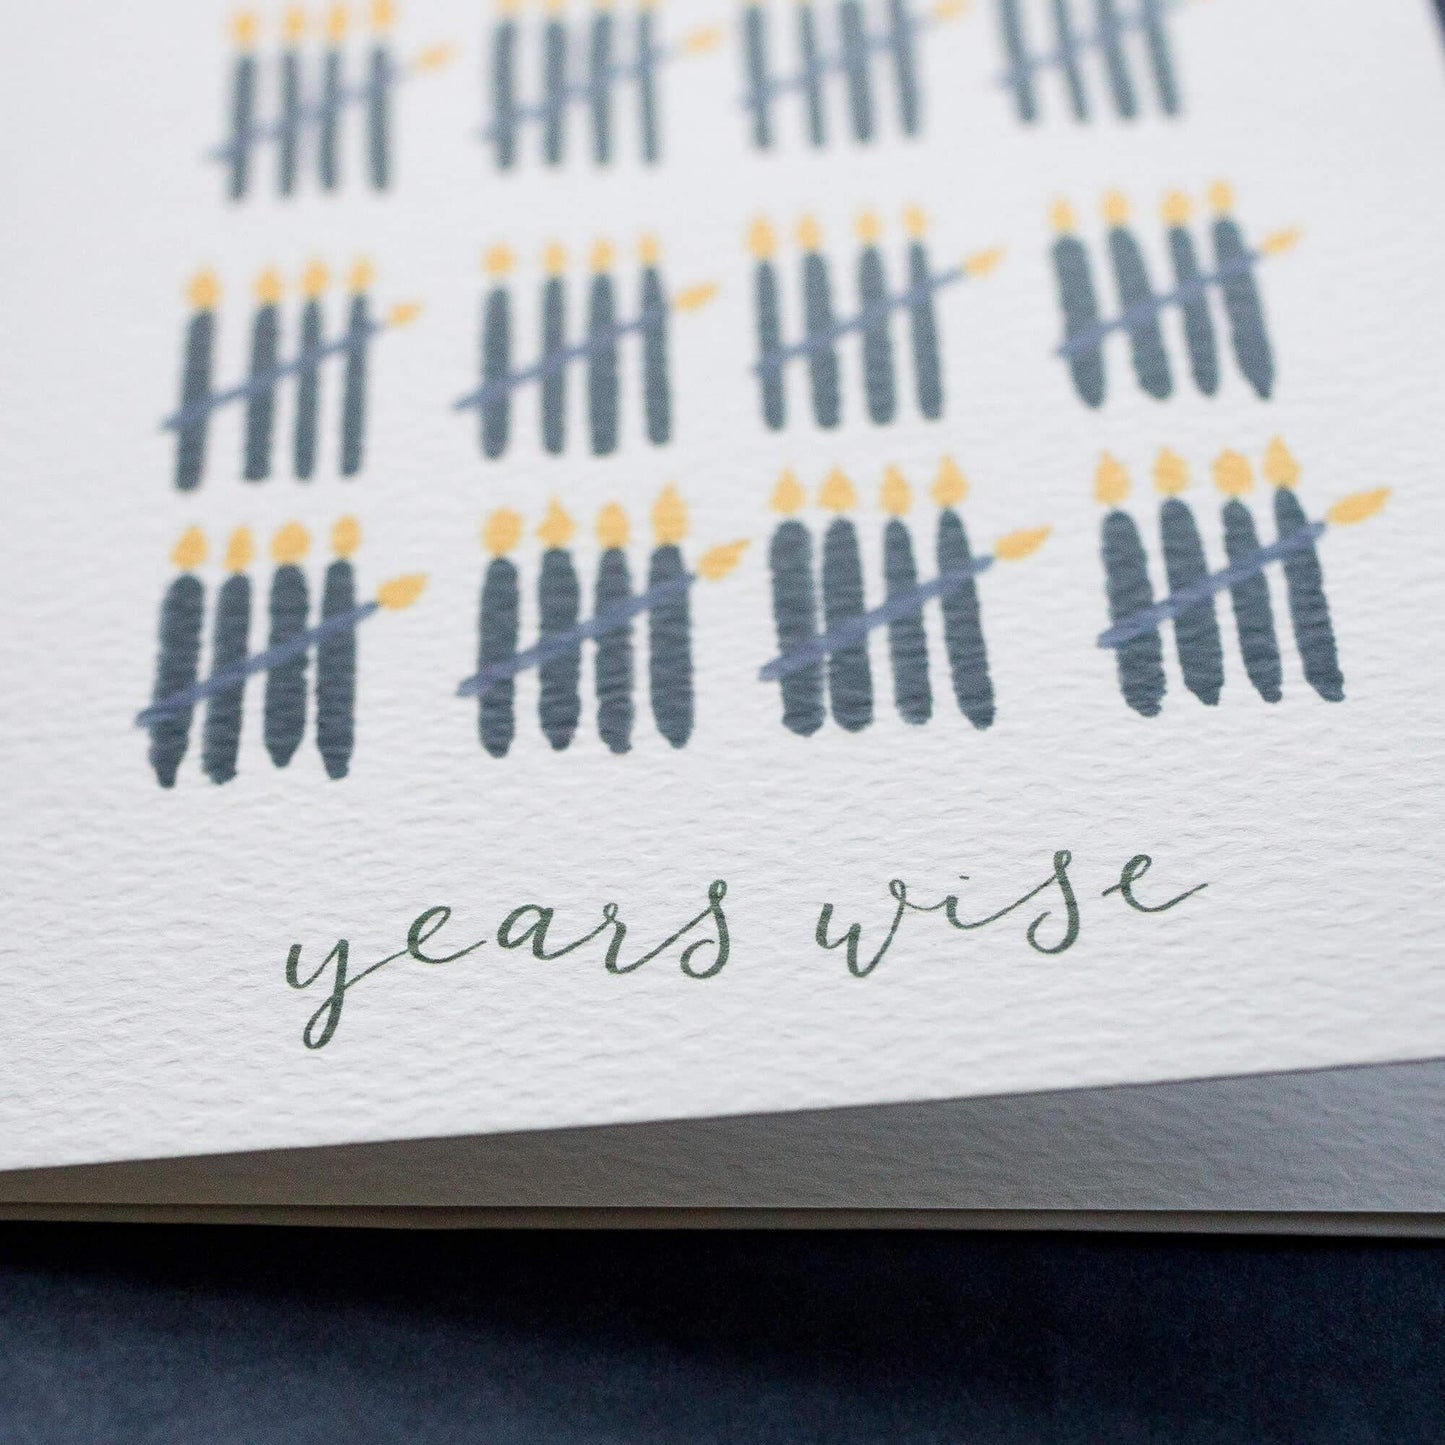 60th birthday card - sixty years wise with 60 candles Greeting & Note Cards And Hope Designs   